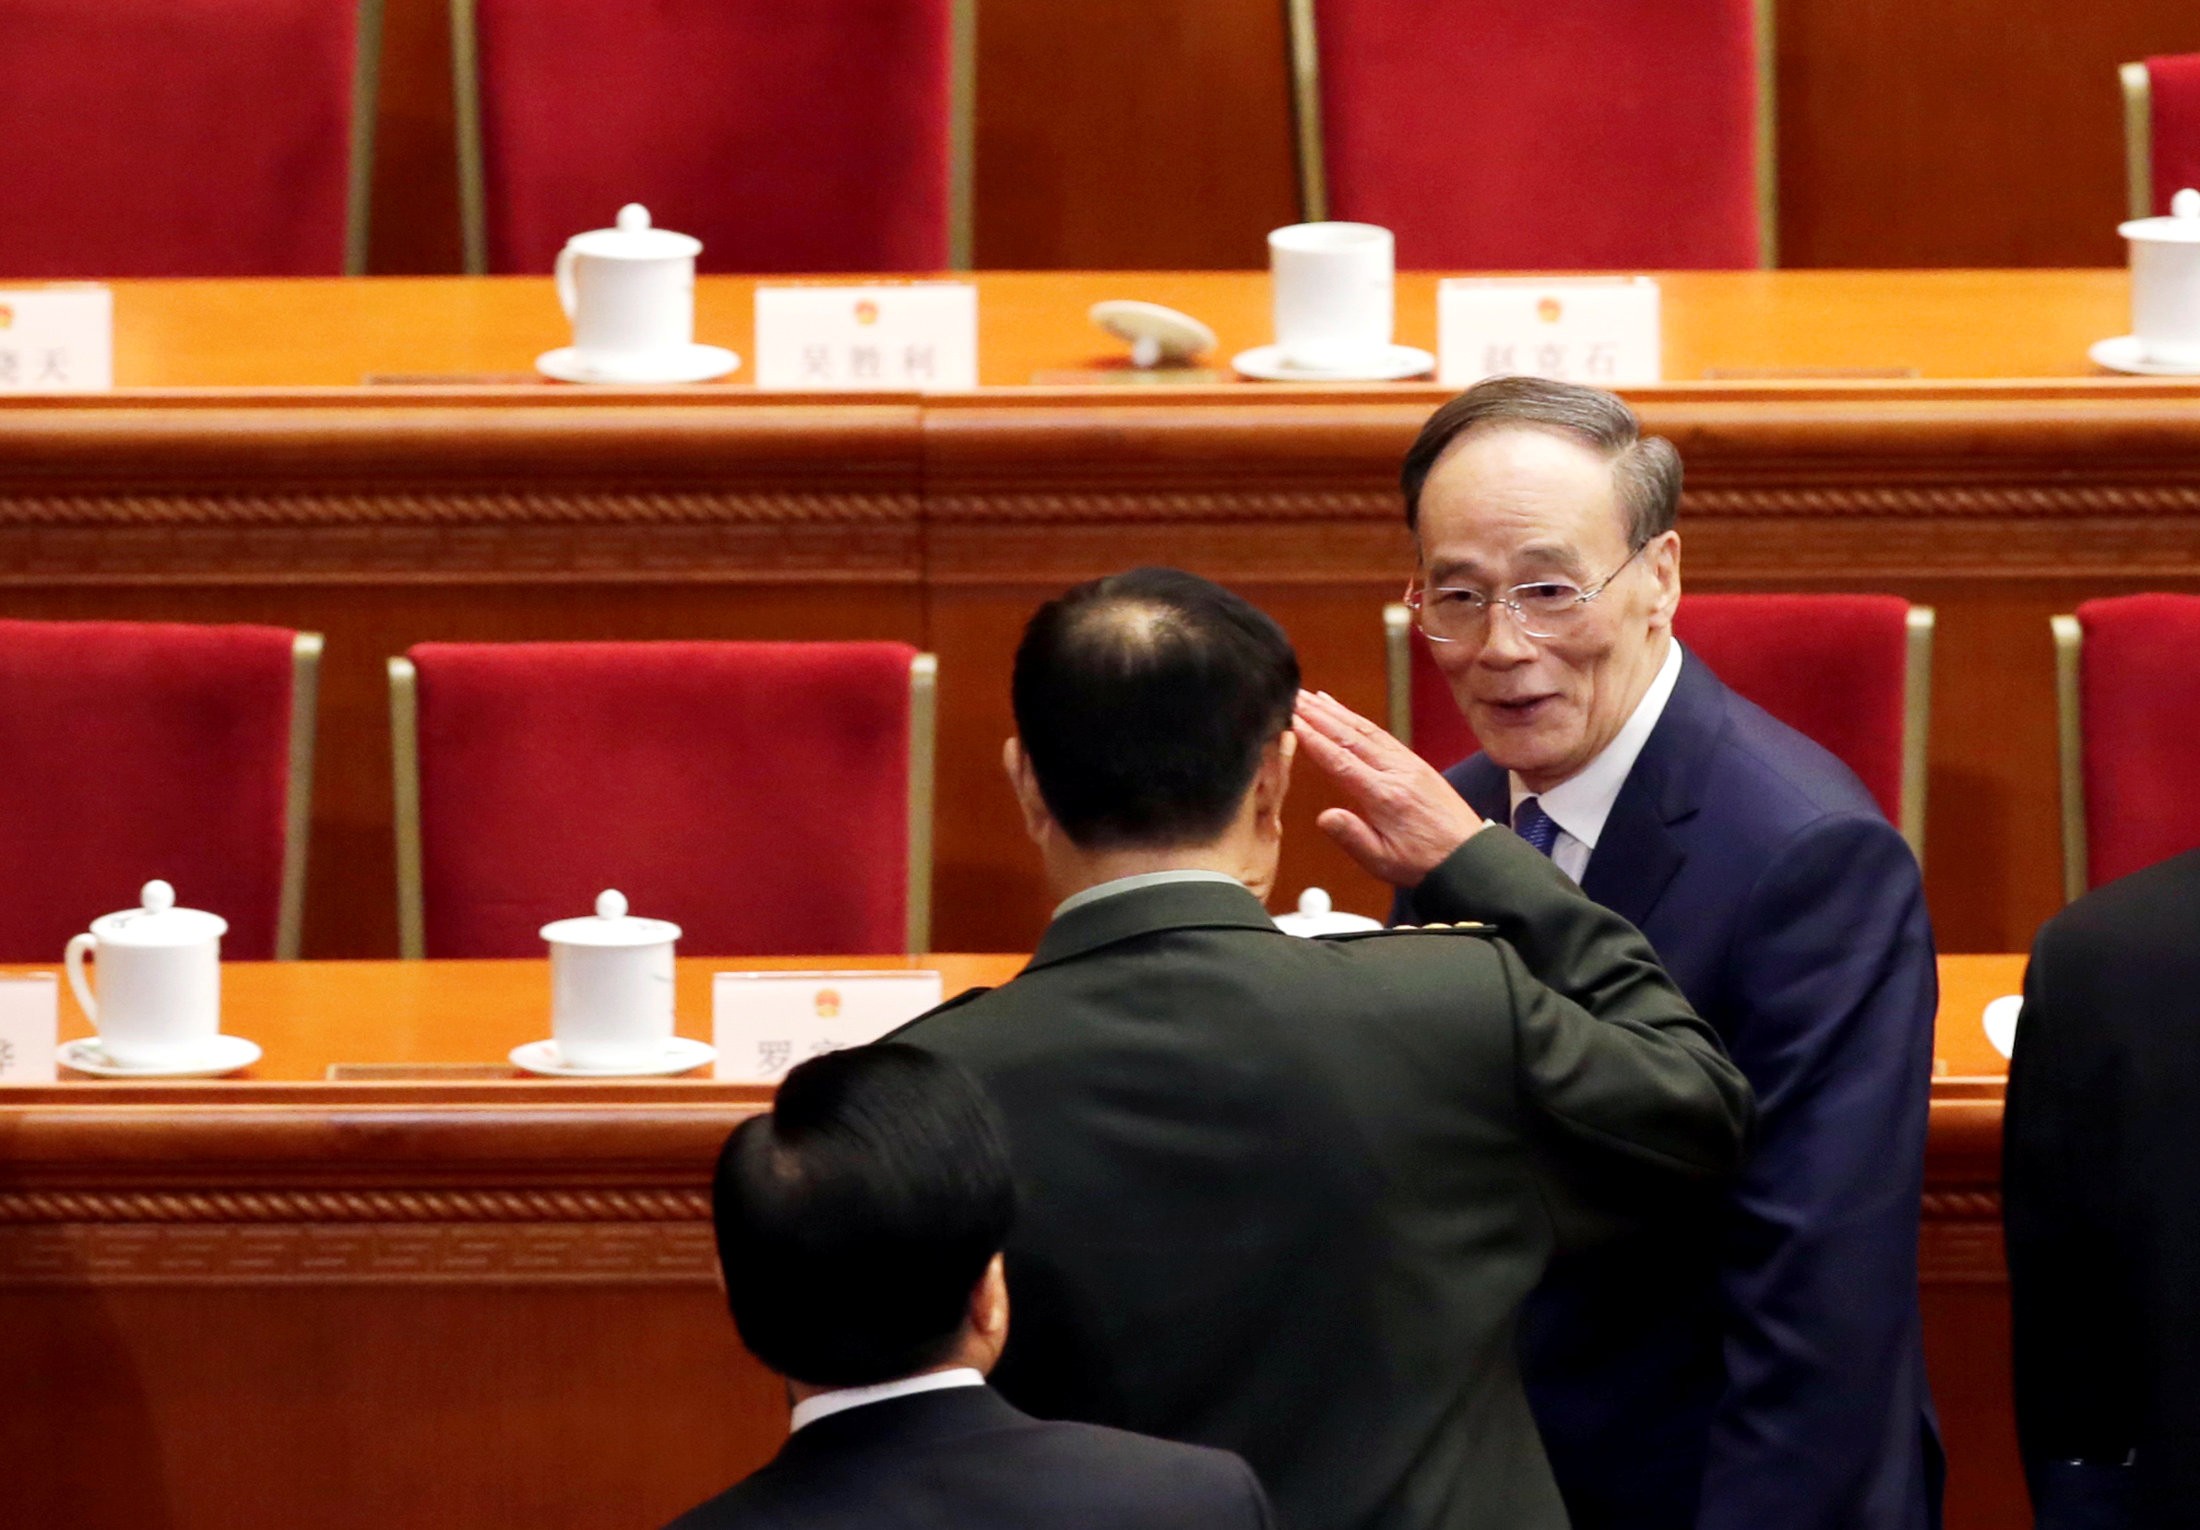 General Fan Changlong salutes former anti-graft tsar Wang Qishan as he leaves after the opening session of the National People's Congress at the Great Hall of the People in Beijing on Monday. Photo: Reuters